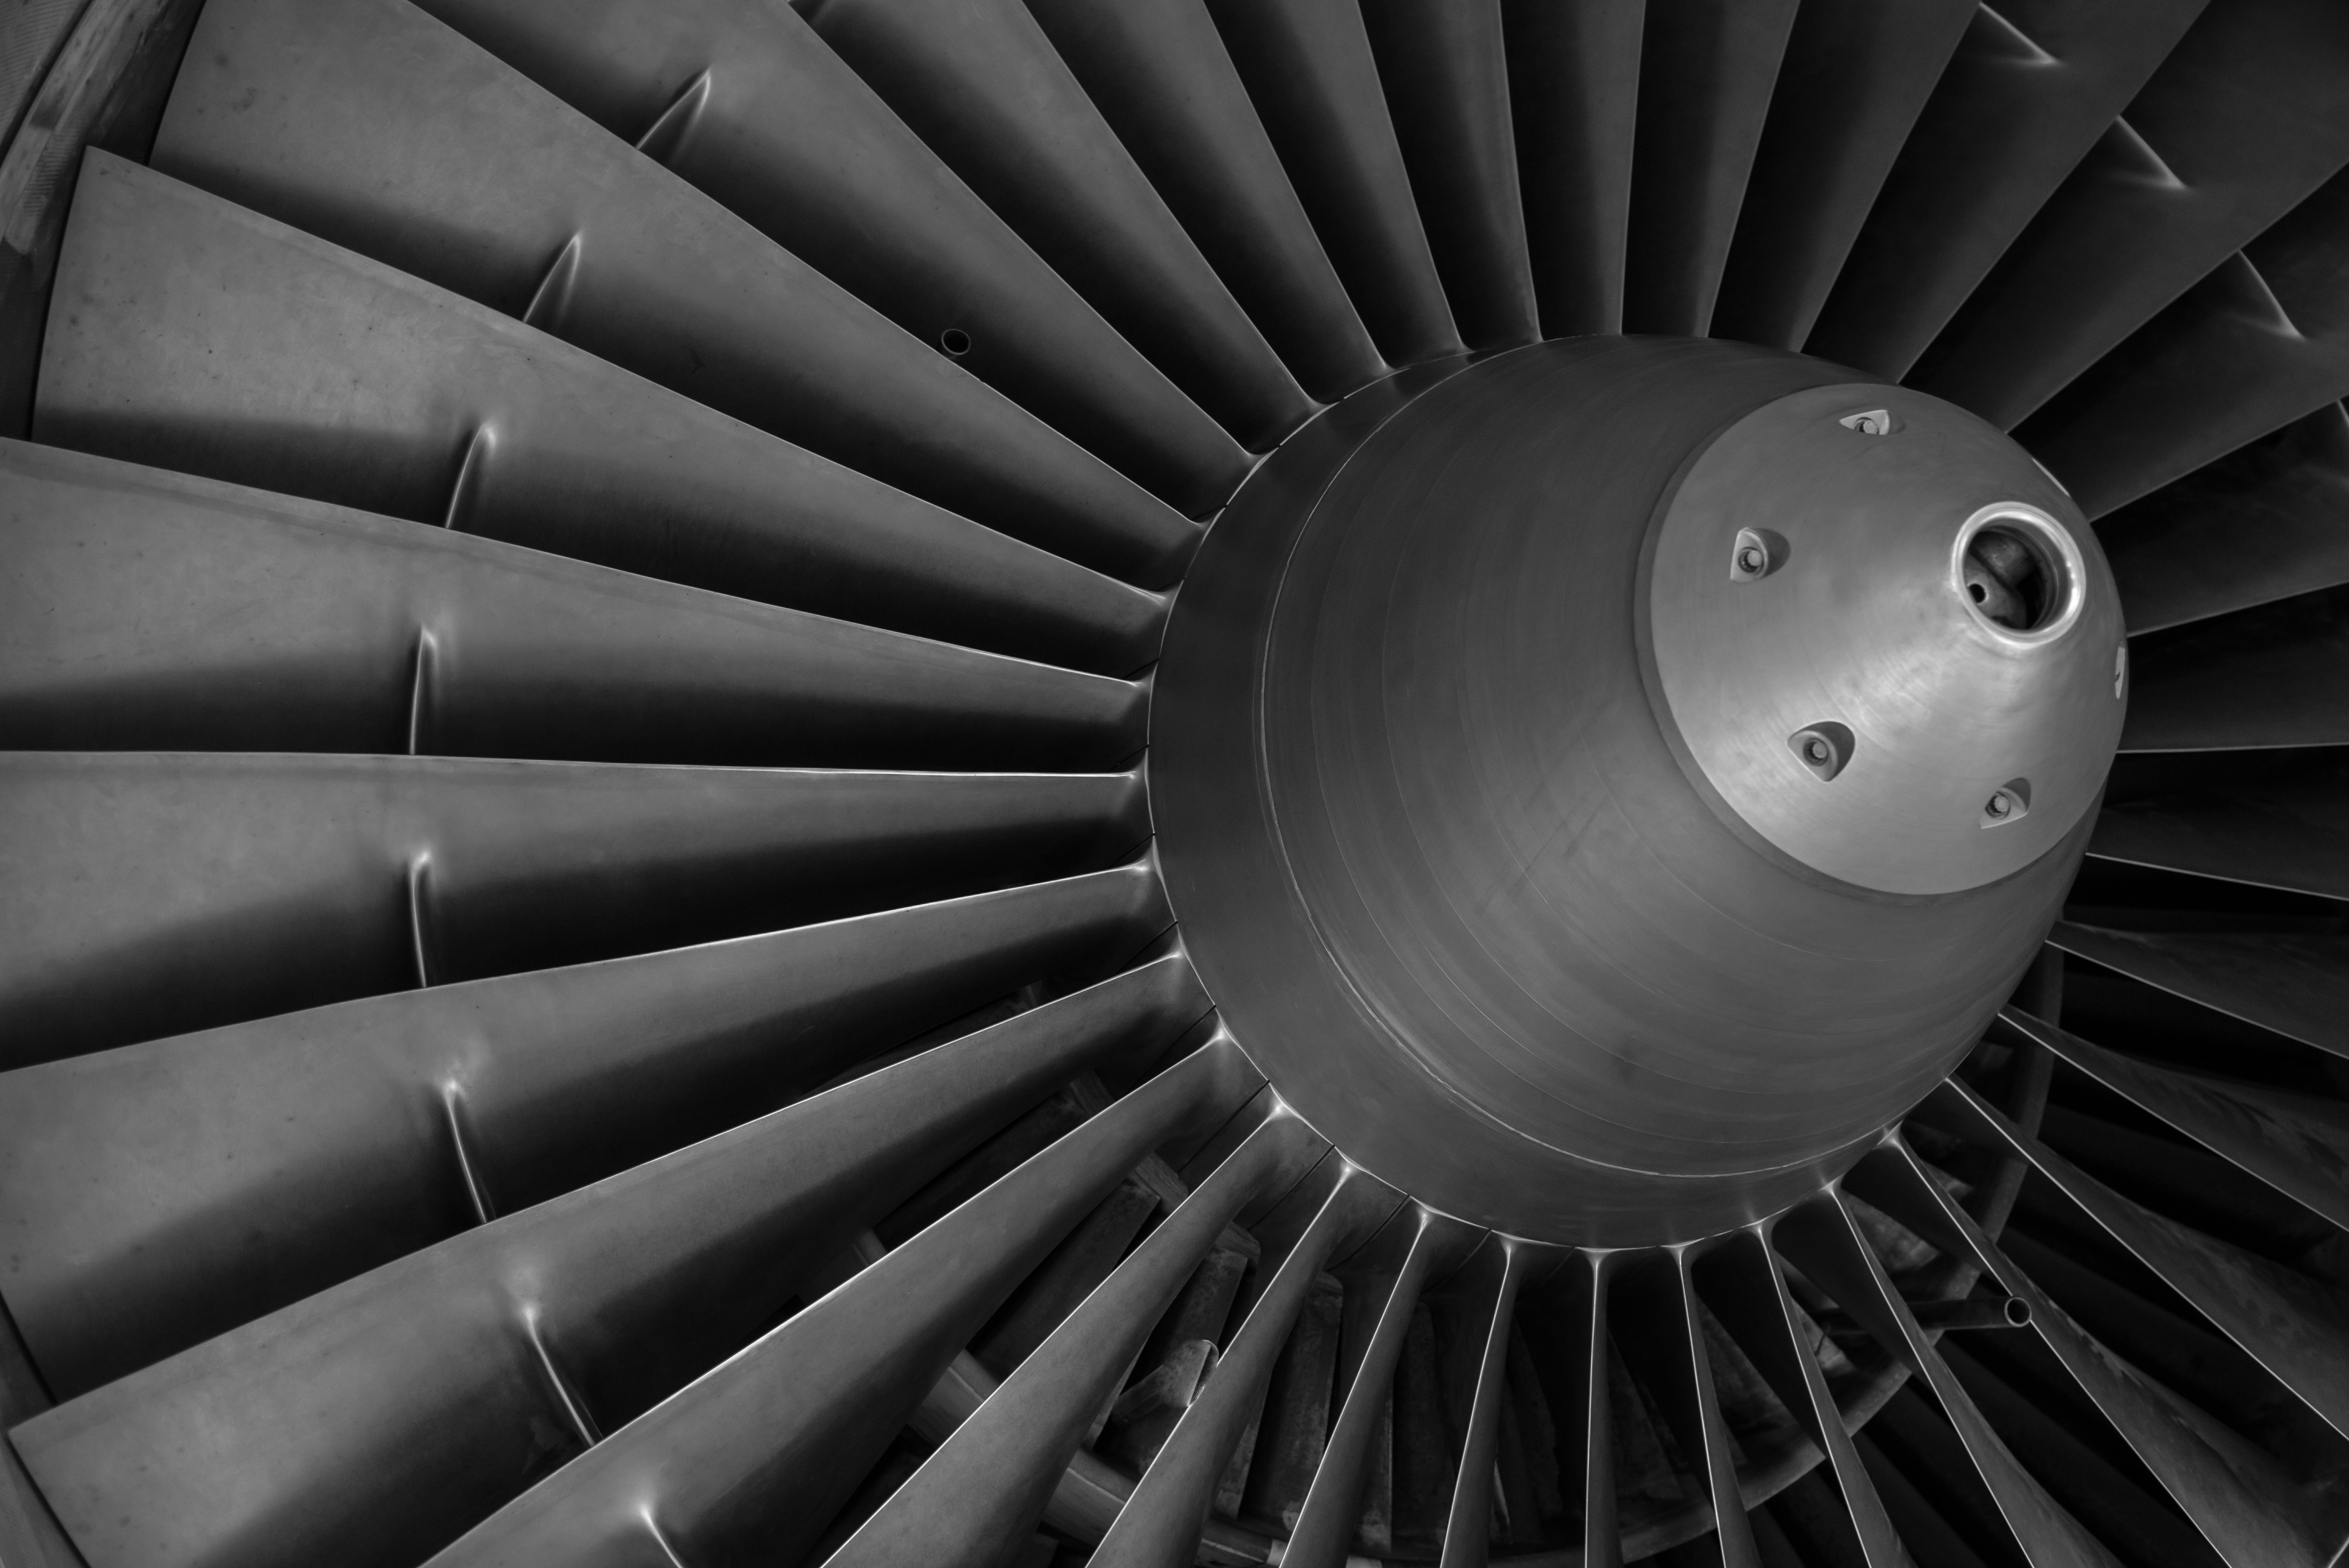 Turbine as a service product offering